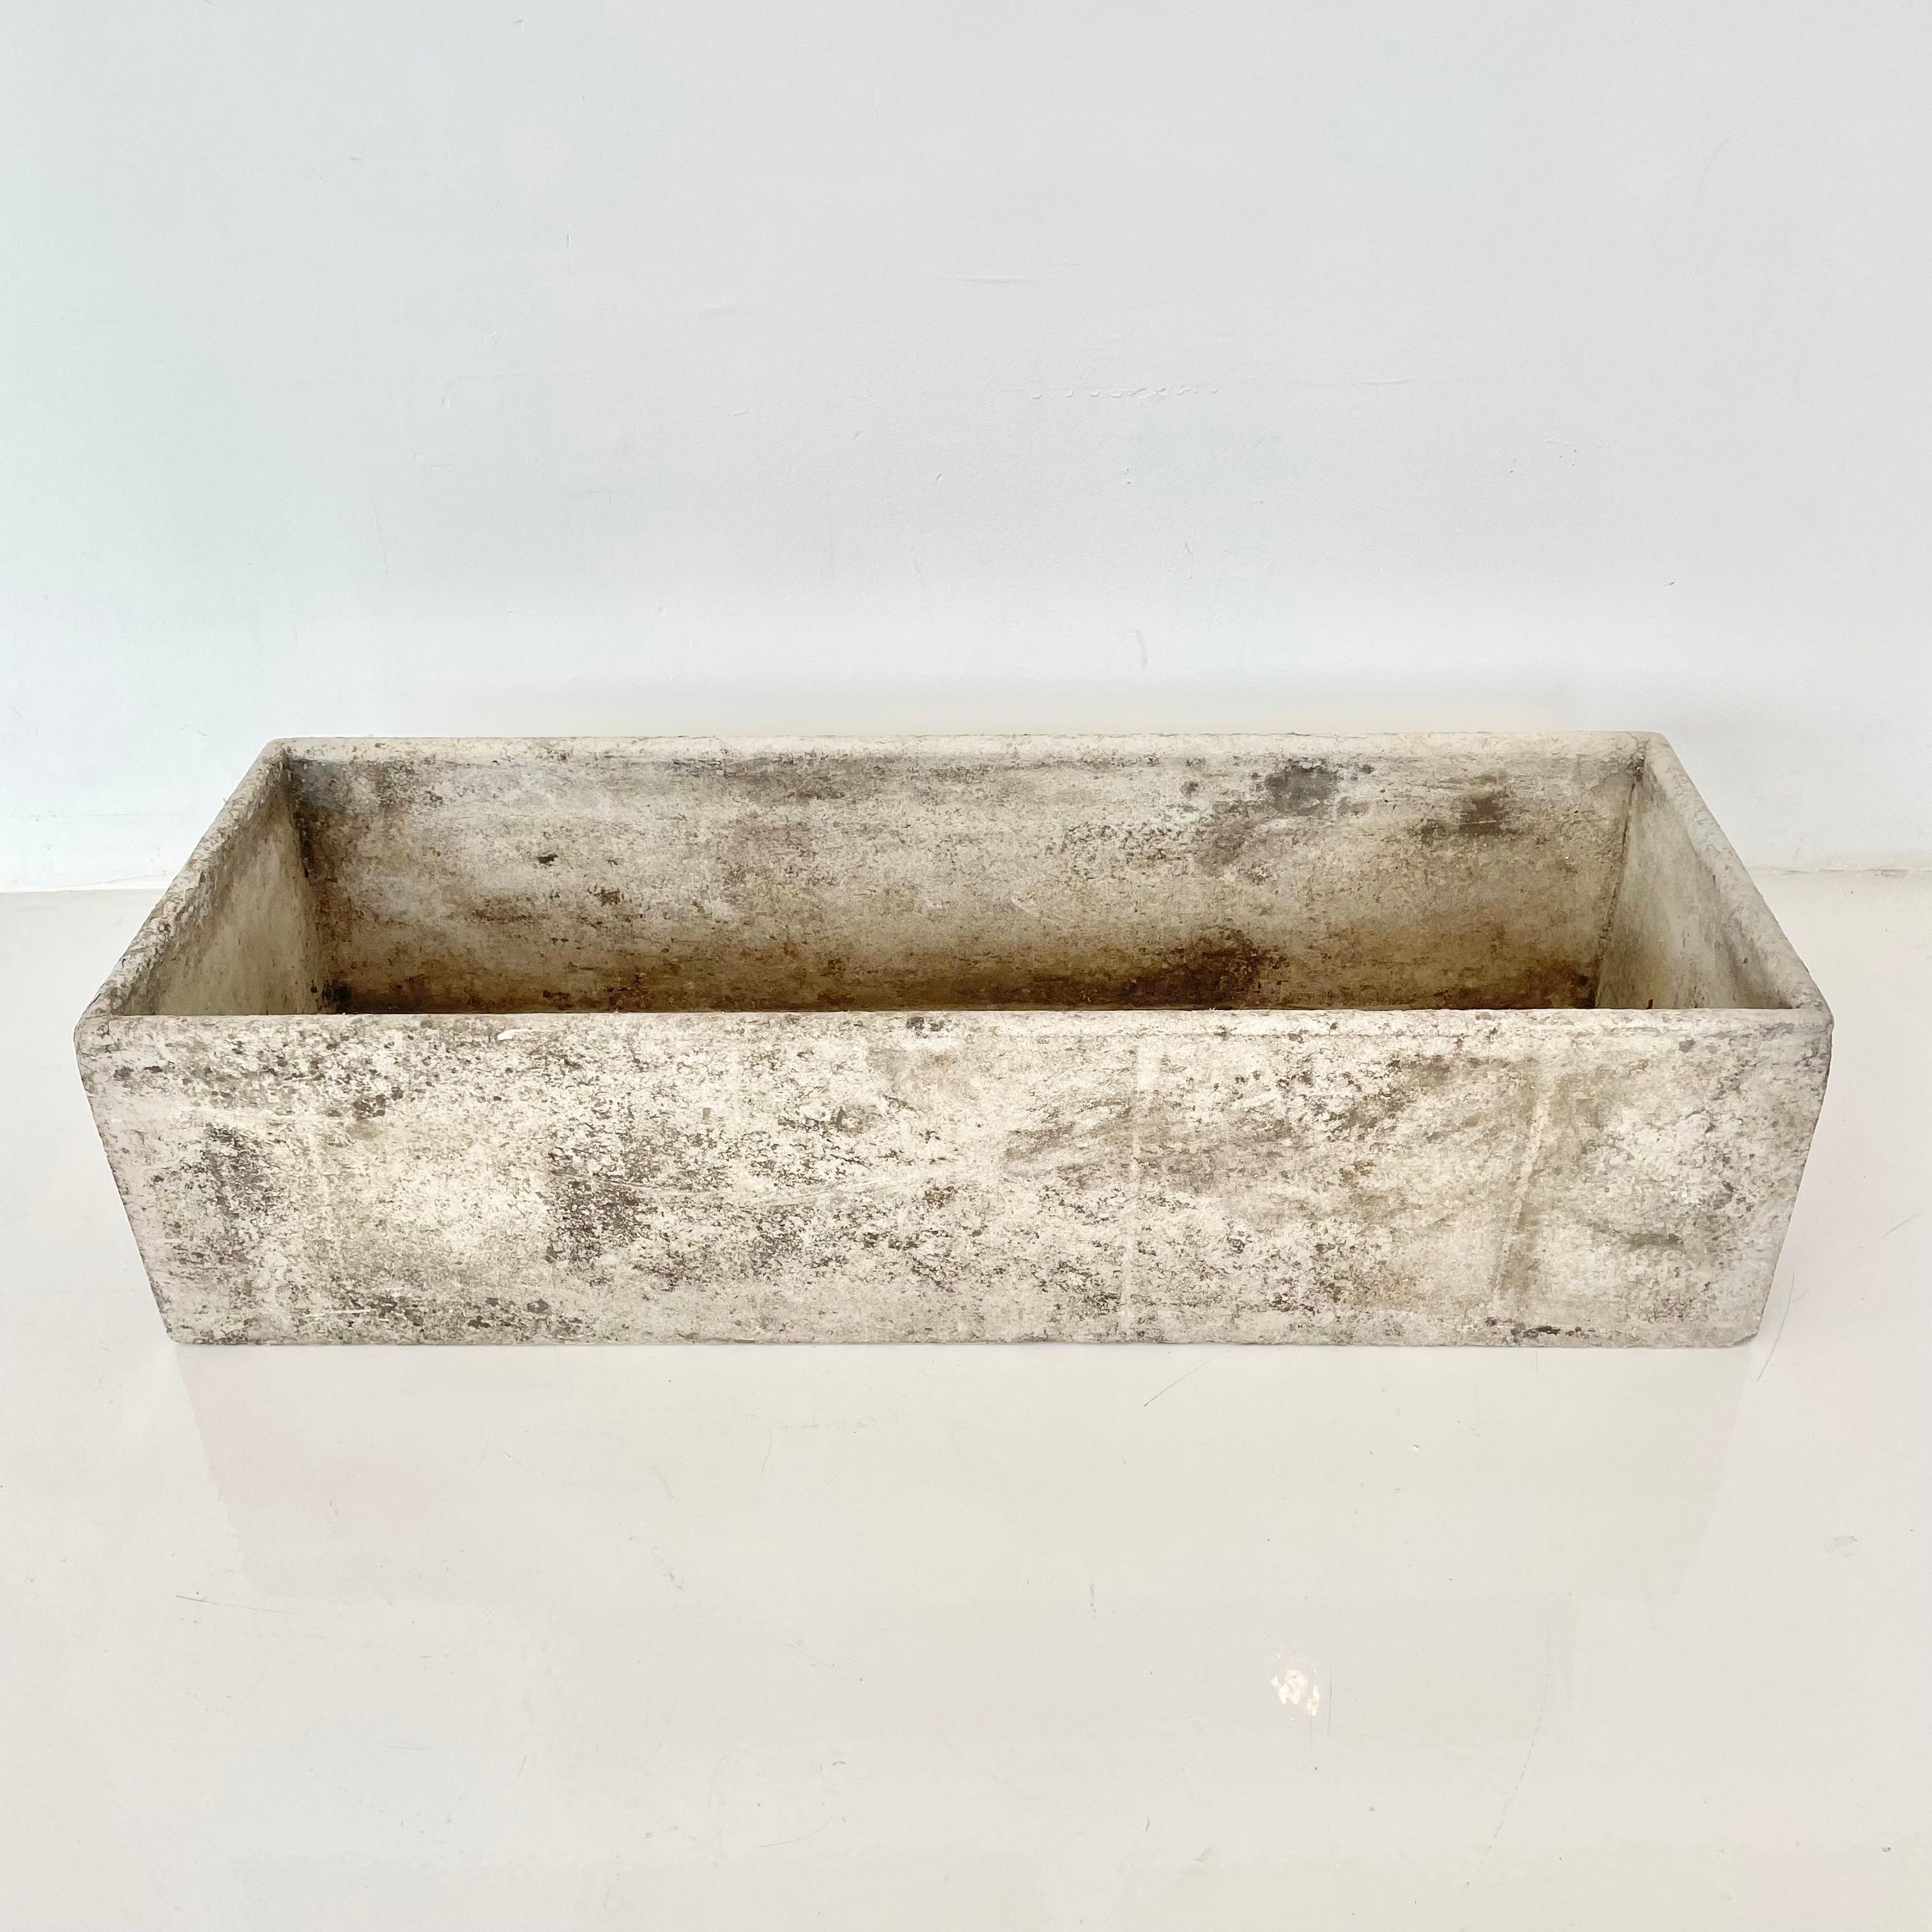 Oversized concrete trough planter by Swiss architect Willy Guhl. Just over 39